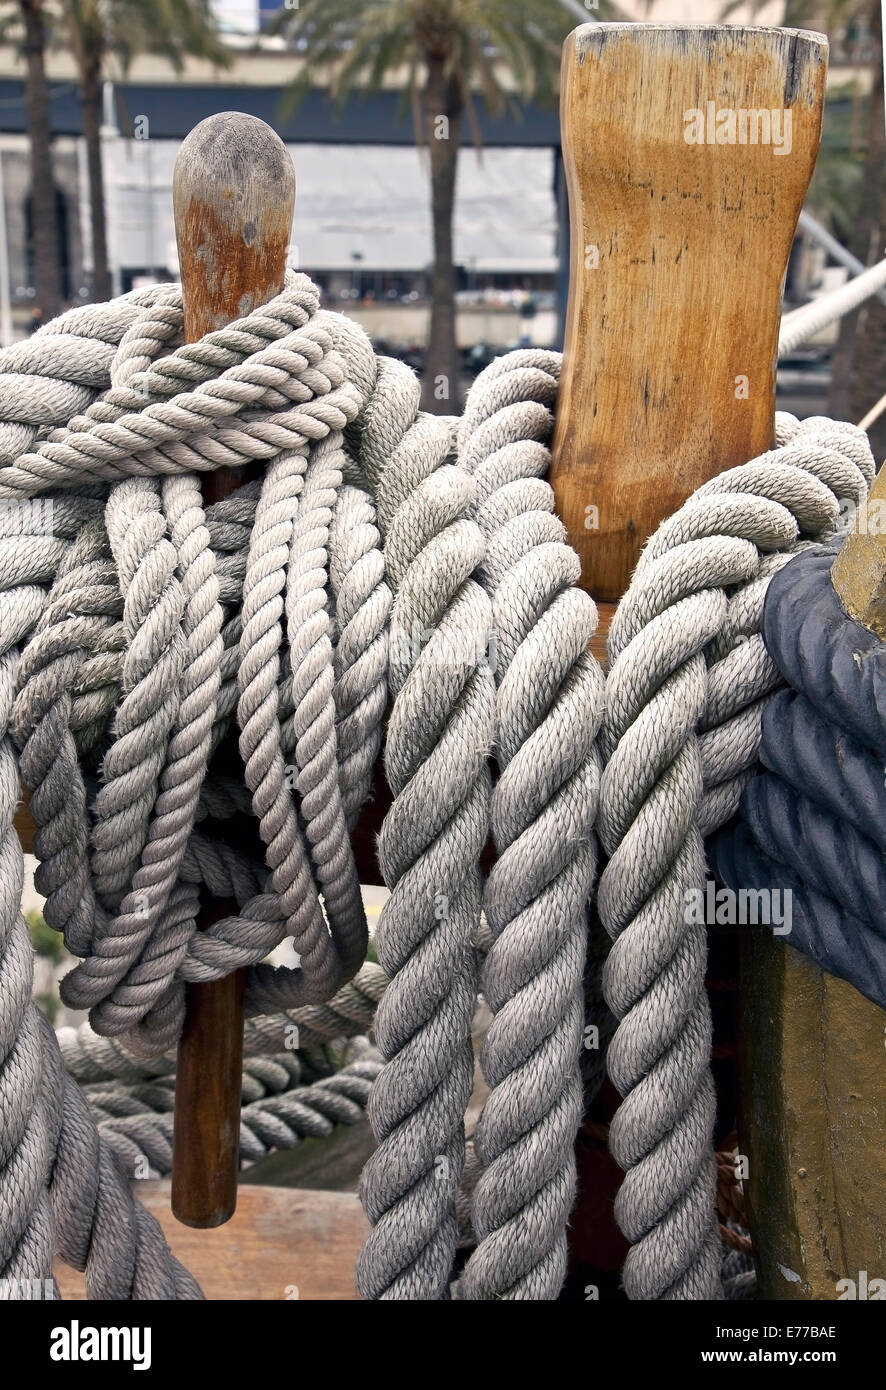 ropes of different sizes fastened around wooden cleats on a yacht wooden deck Stock Photo